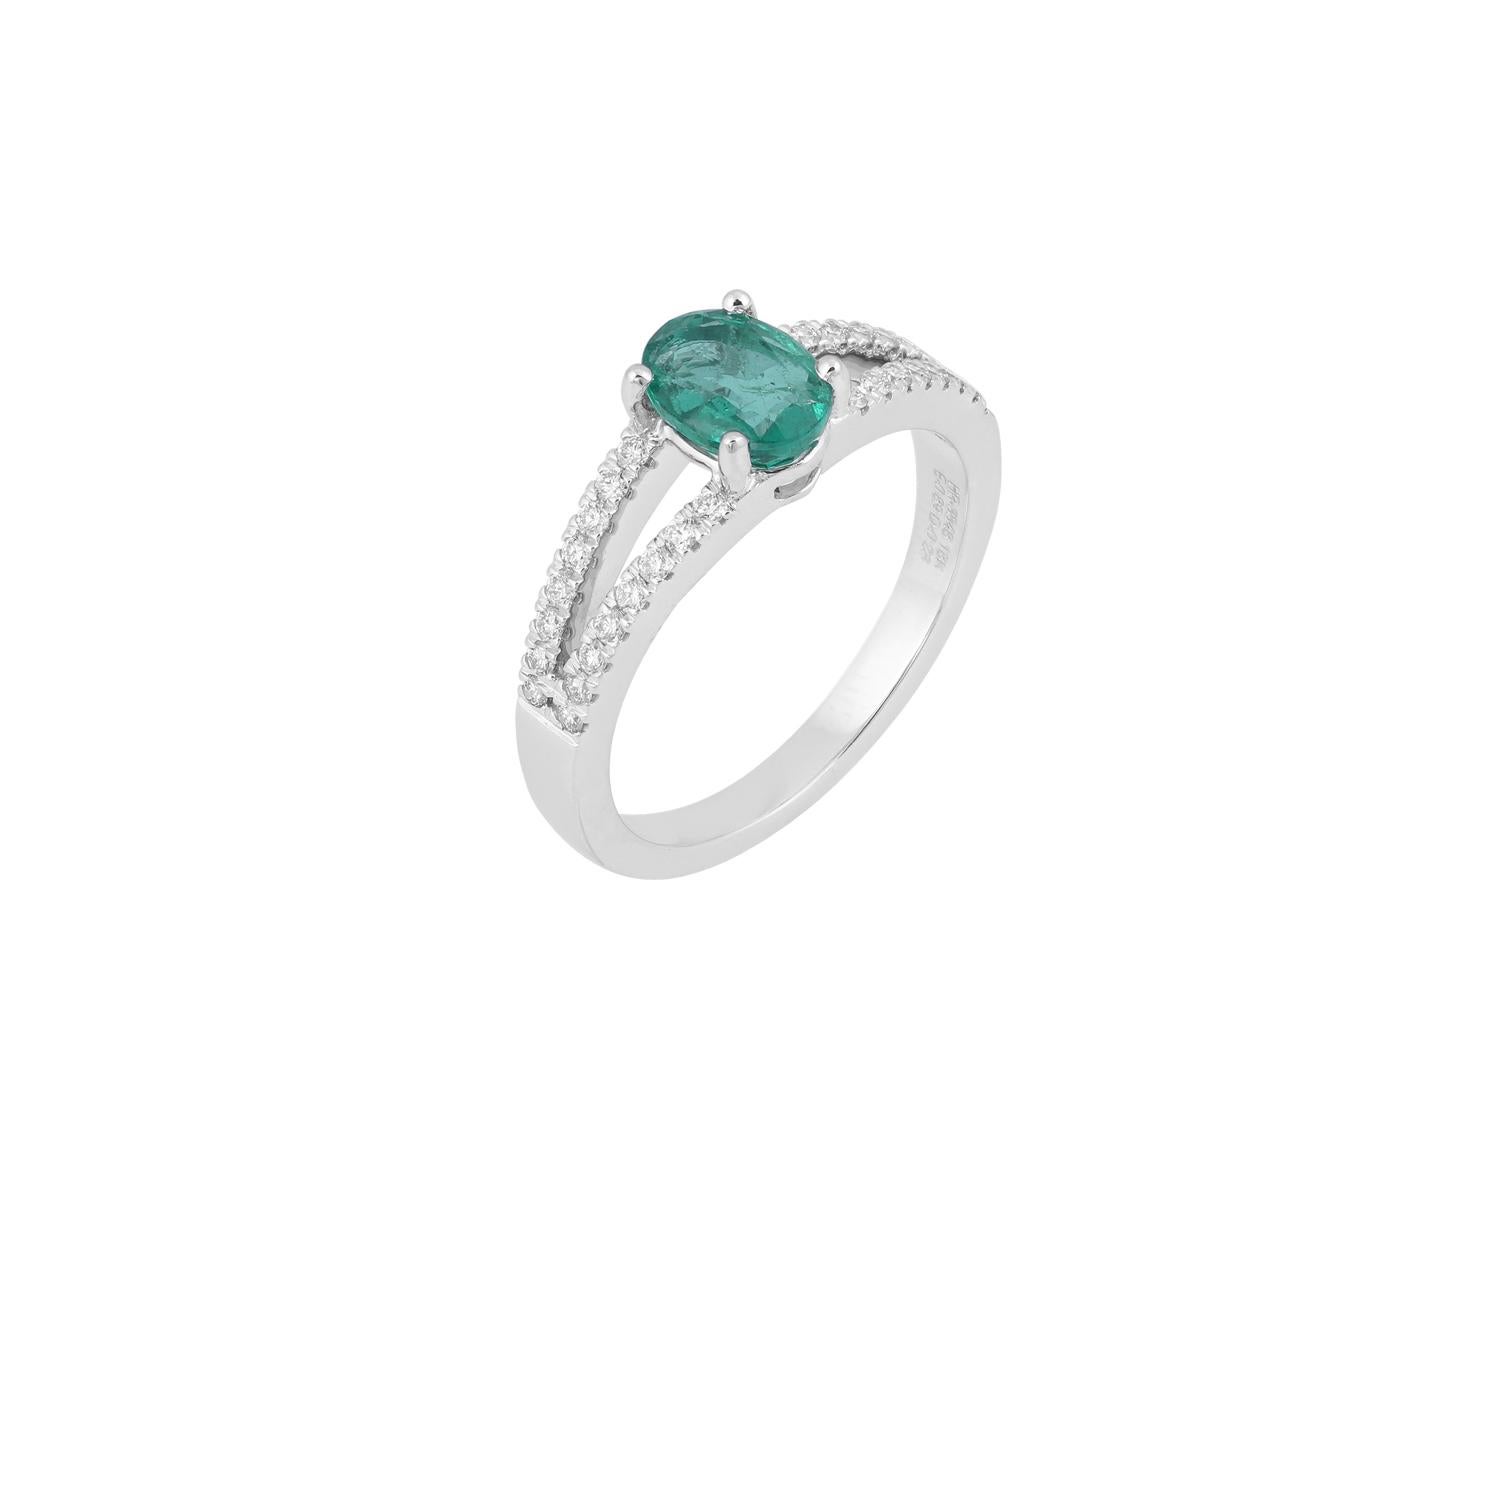 Contemporary 0.92 Carat Clear Zambian Emerald & Diamond Ring in 18K White Gold For Sale